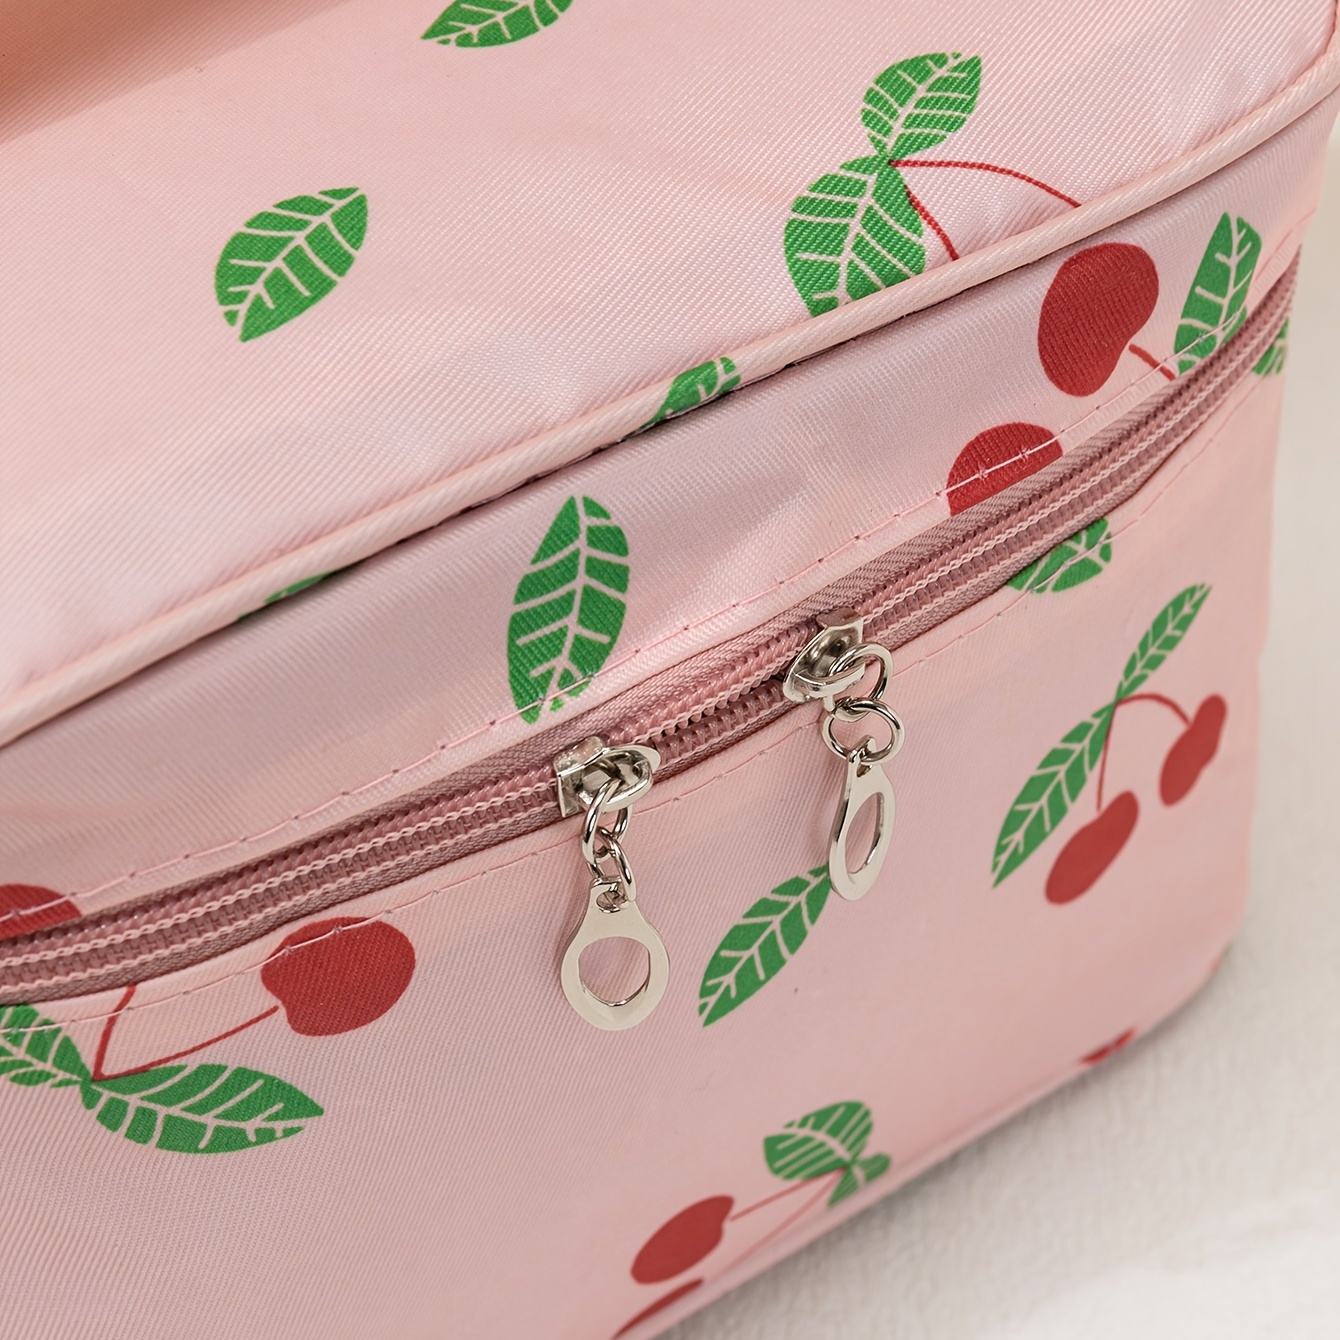  Psaytomey Portable Cosmetic Bag Cherry Blossom Large Capacity  Travel Makeup Bag Drawstring Toiletry Bucket Bags Cosmetics Essentials  Accessories : Beauty & Personal Care